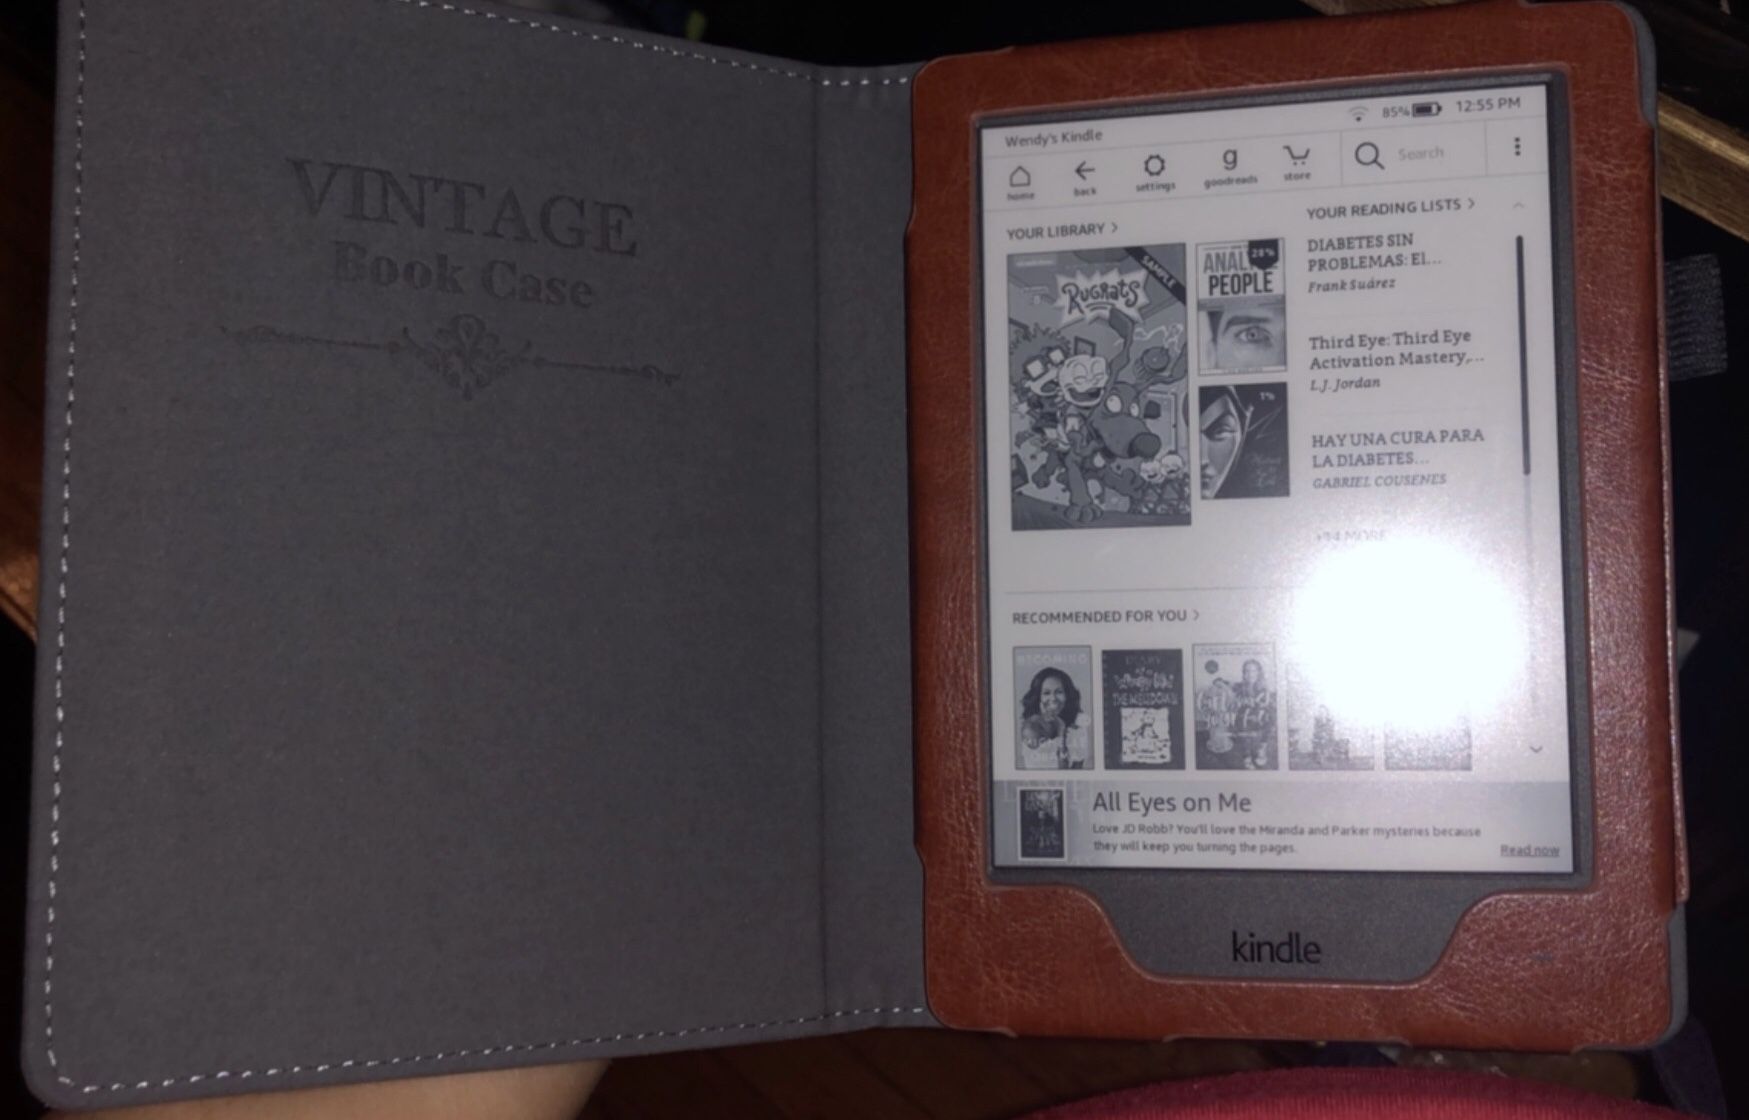 Kindle with vintage cover